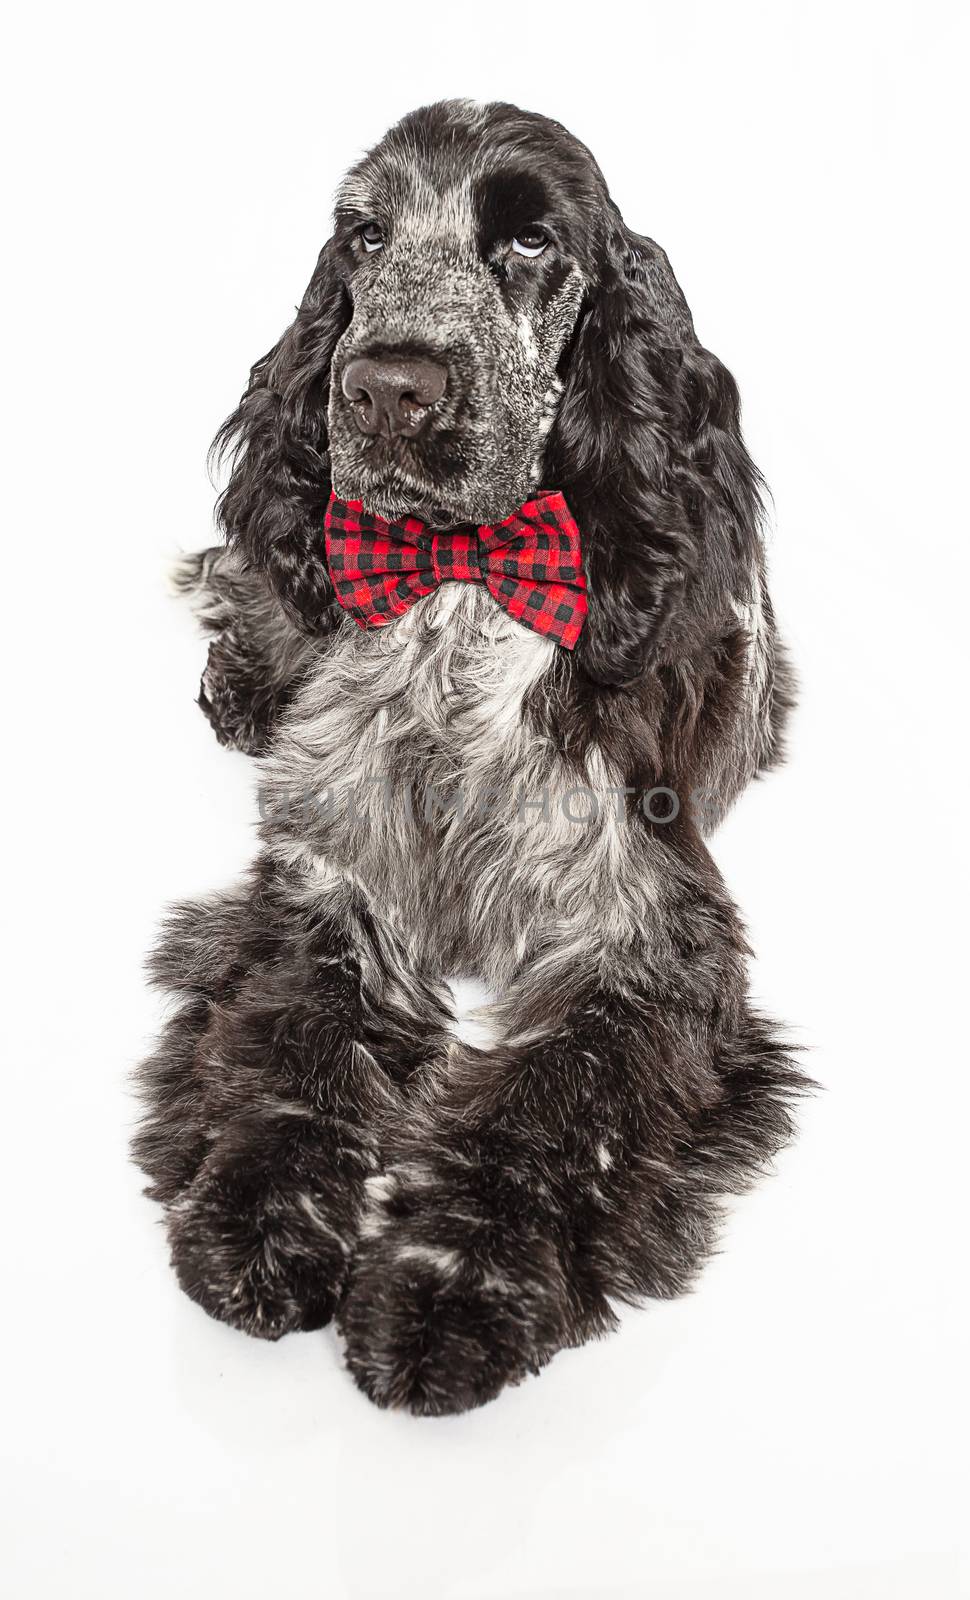 English cocker spaniel wearing a bow tie, isolated on a white background